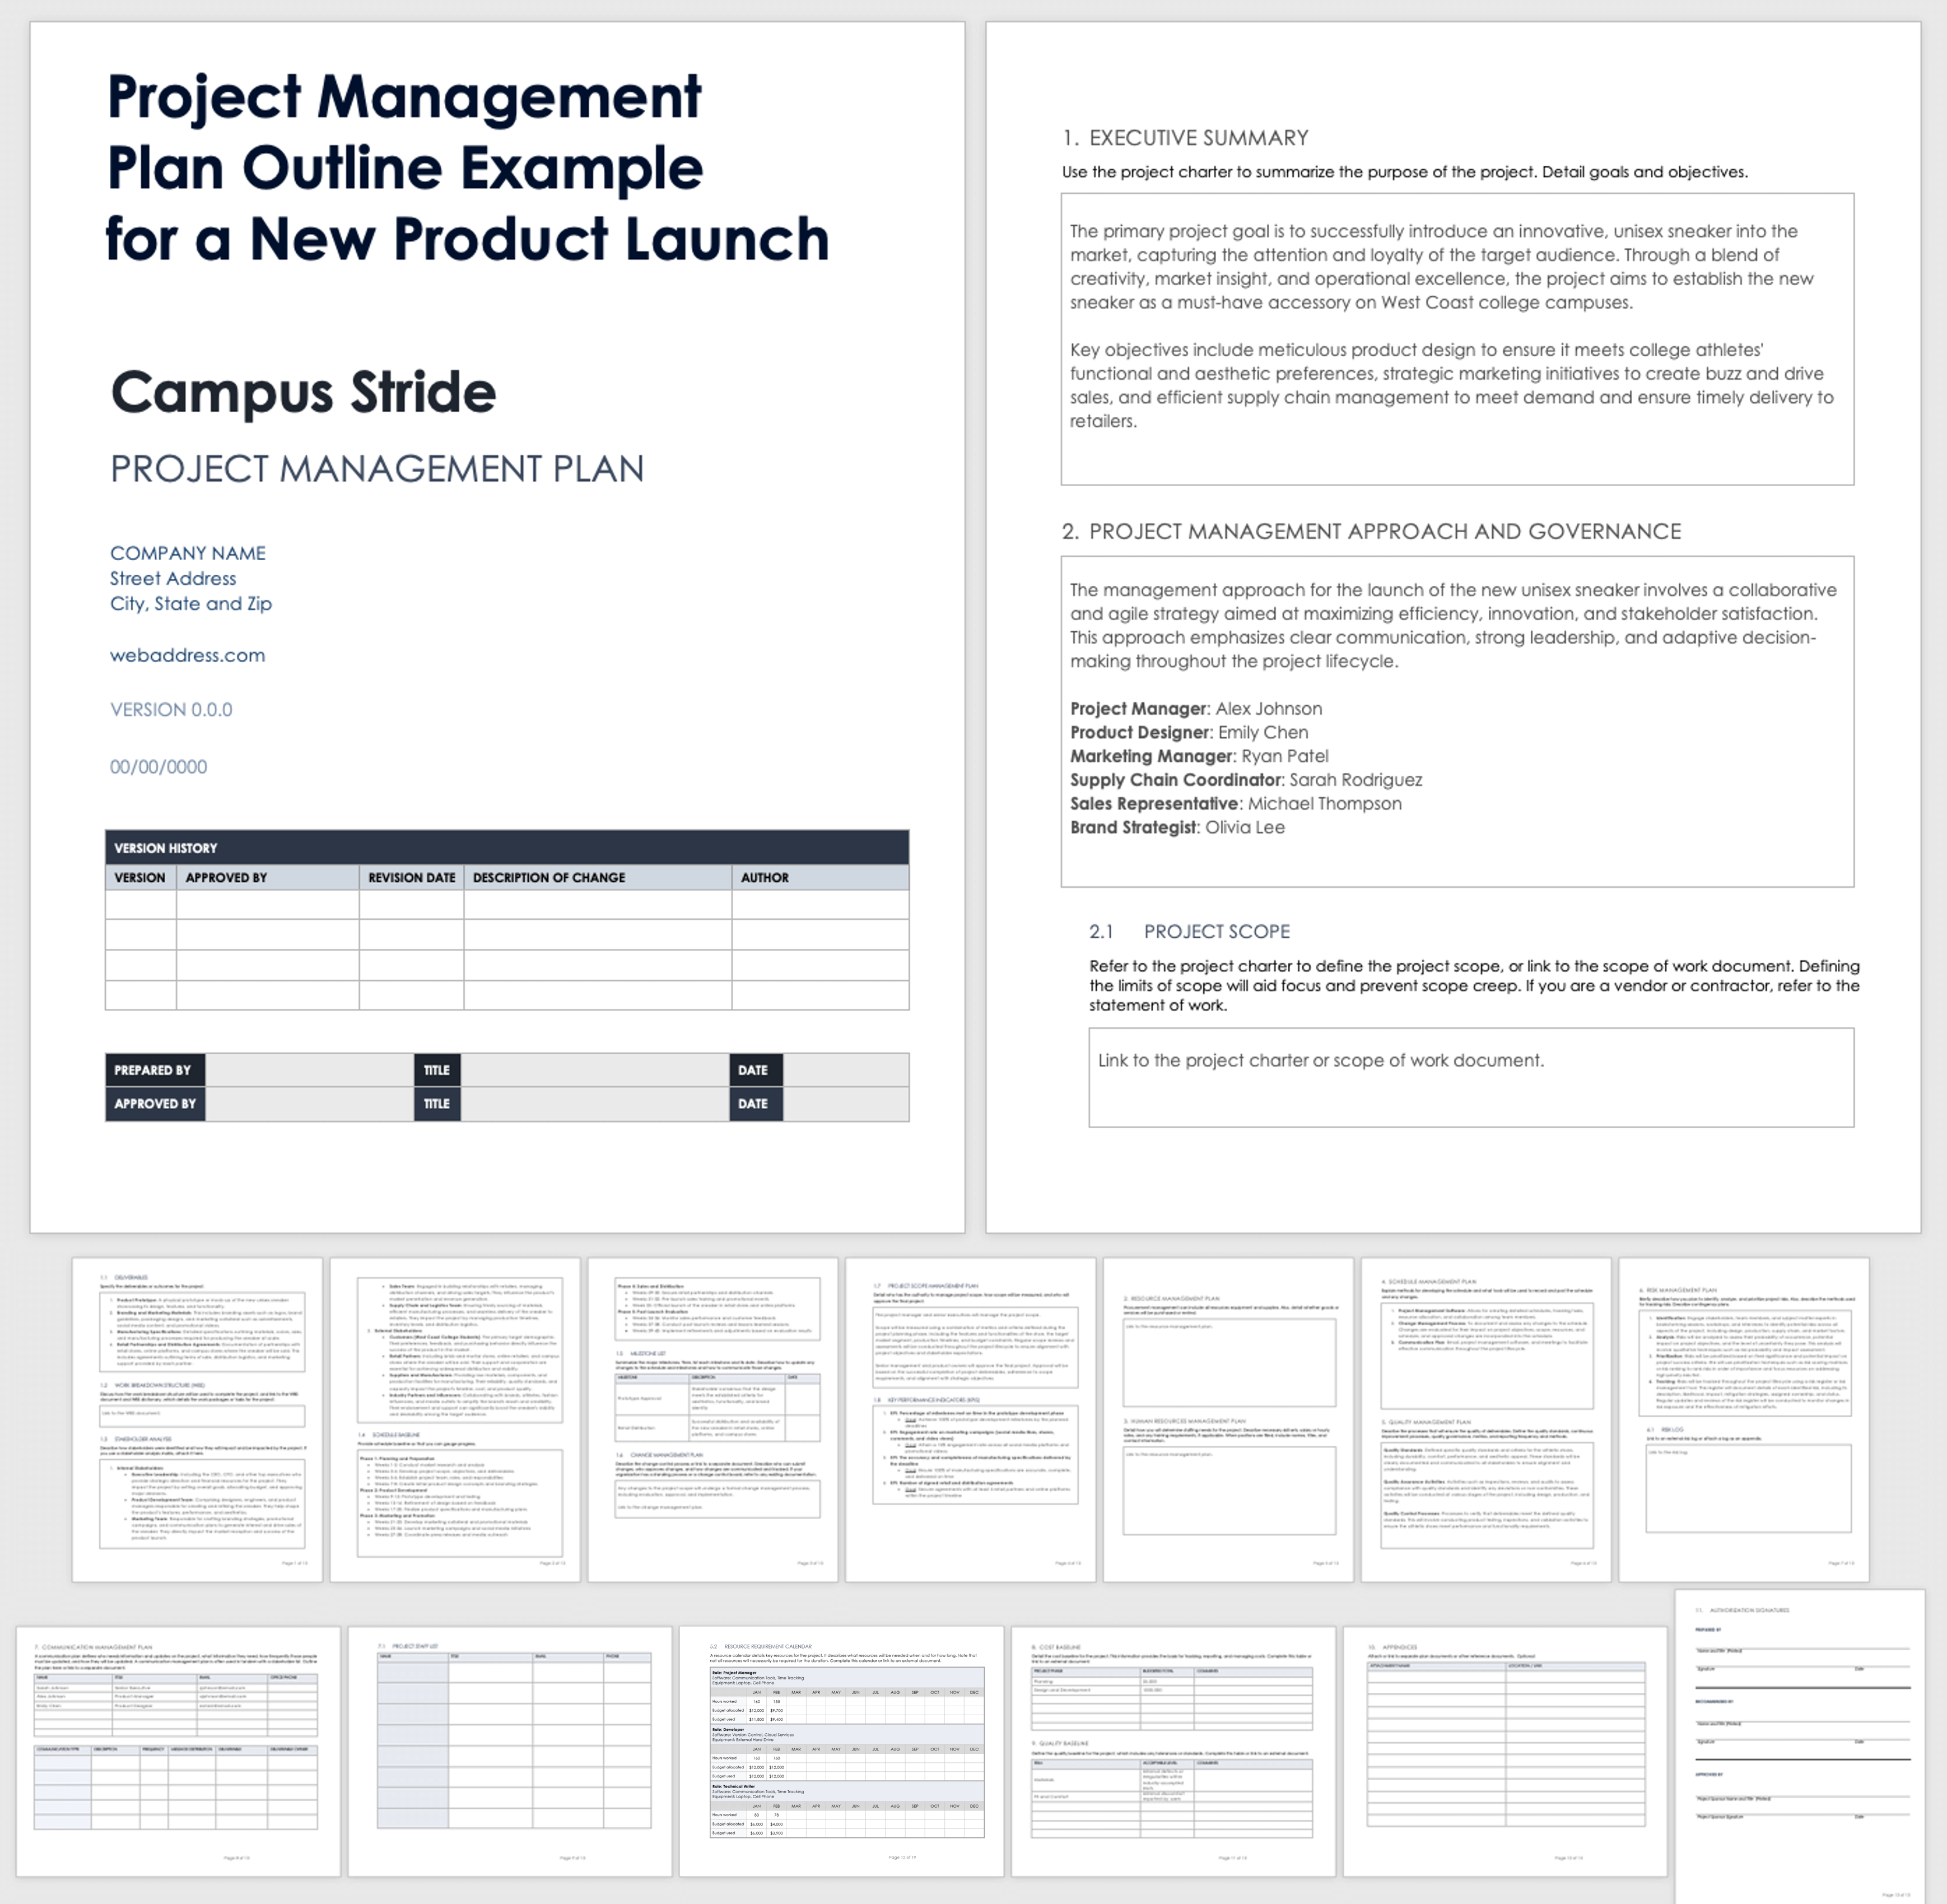 Project Management Plan Outline For A New Product Launch